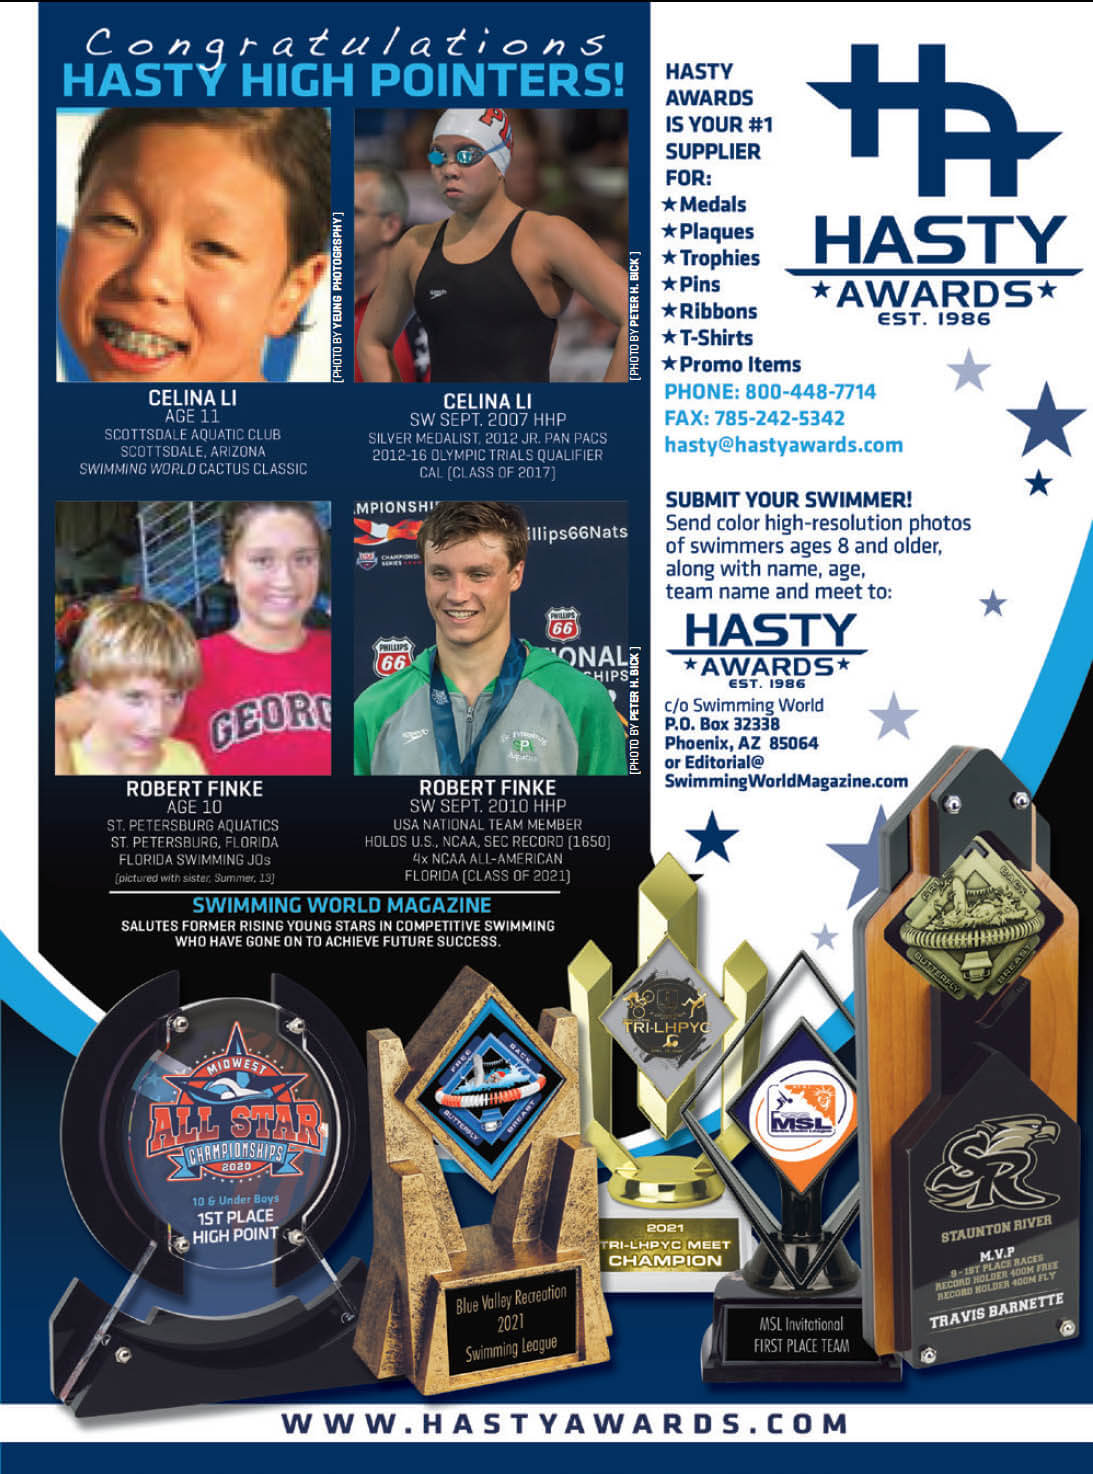 Swimming World March 2021 - Hasty High Pointers - Hasty Awards - Celina Li and Robert Finke - full page